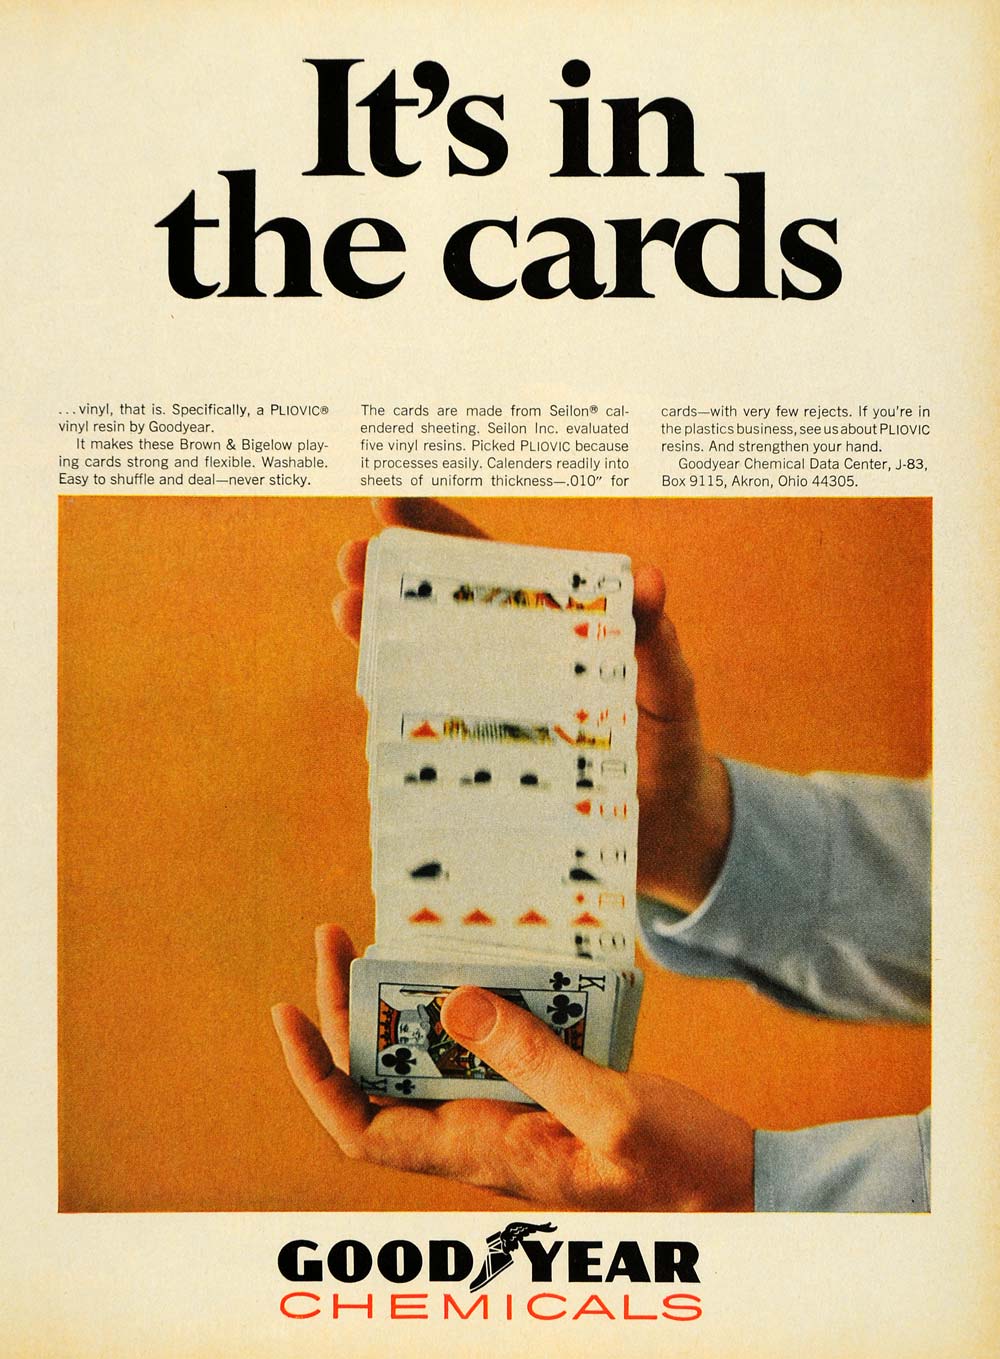 1965 Ad Goodyear Chemical Data Center Playing Cards - ORIGINAL ADVERTISING TM6